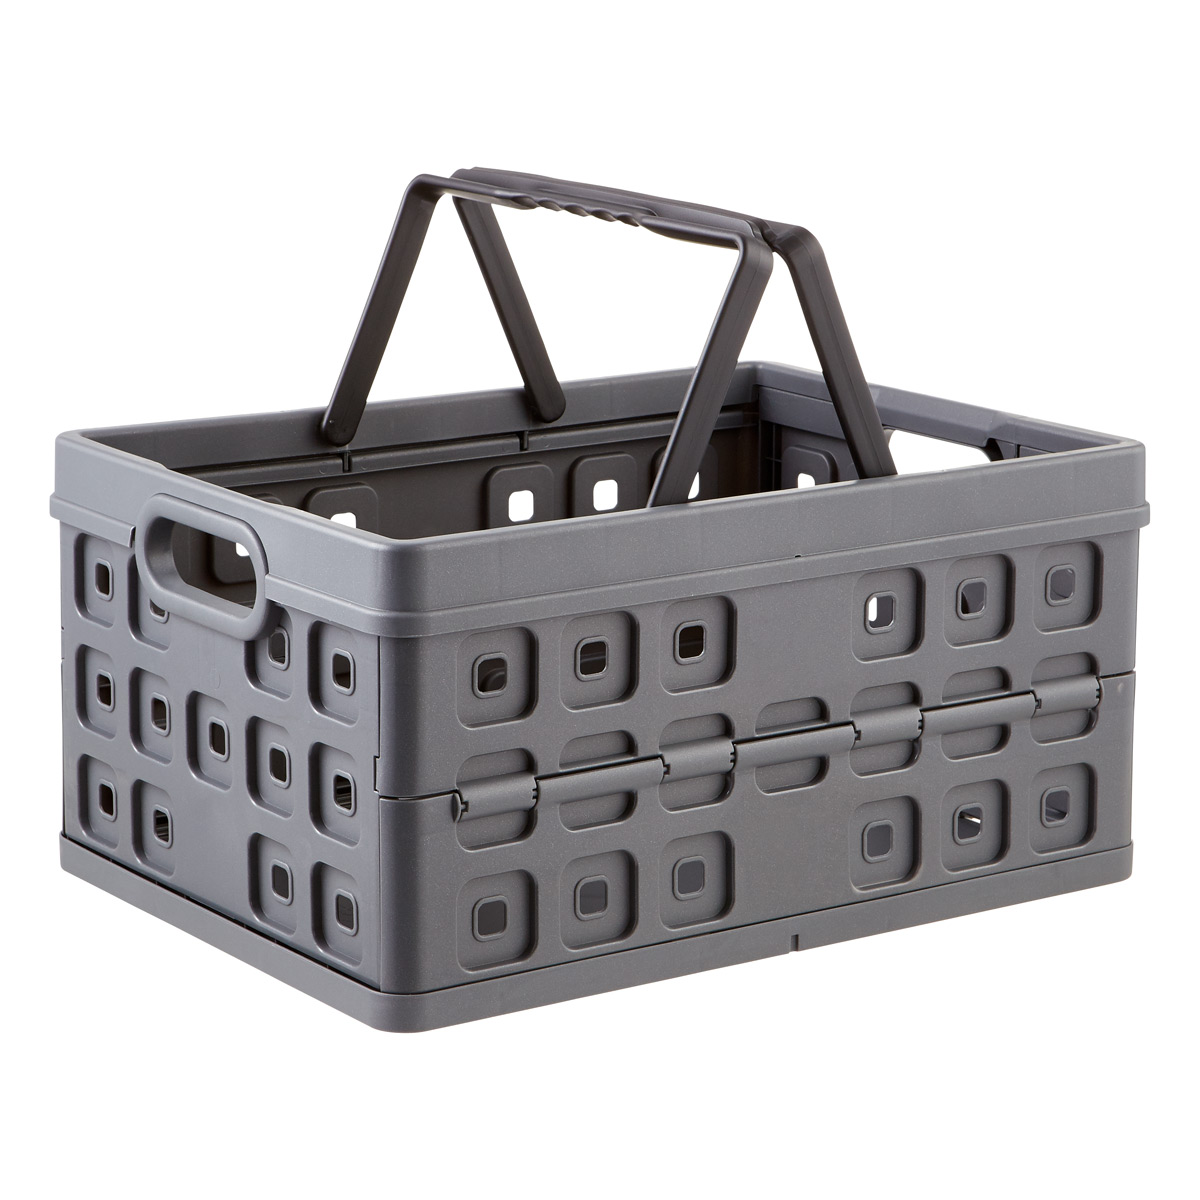 Foldable Storage Crates Folding Transfer Box Box Bin Cube Milk Crates Stackable Baskets 55L Plastic Milk Crates Heavy Duty Stackable for Storage Black Collapsible Storage Containers 